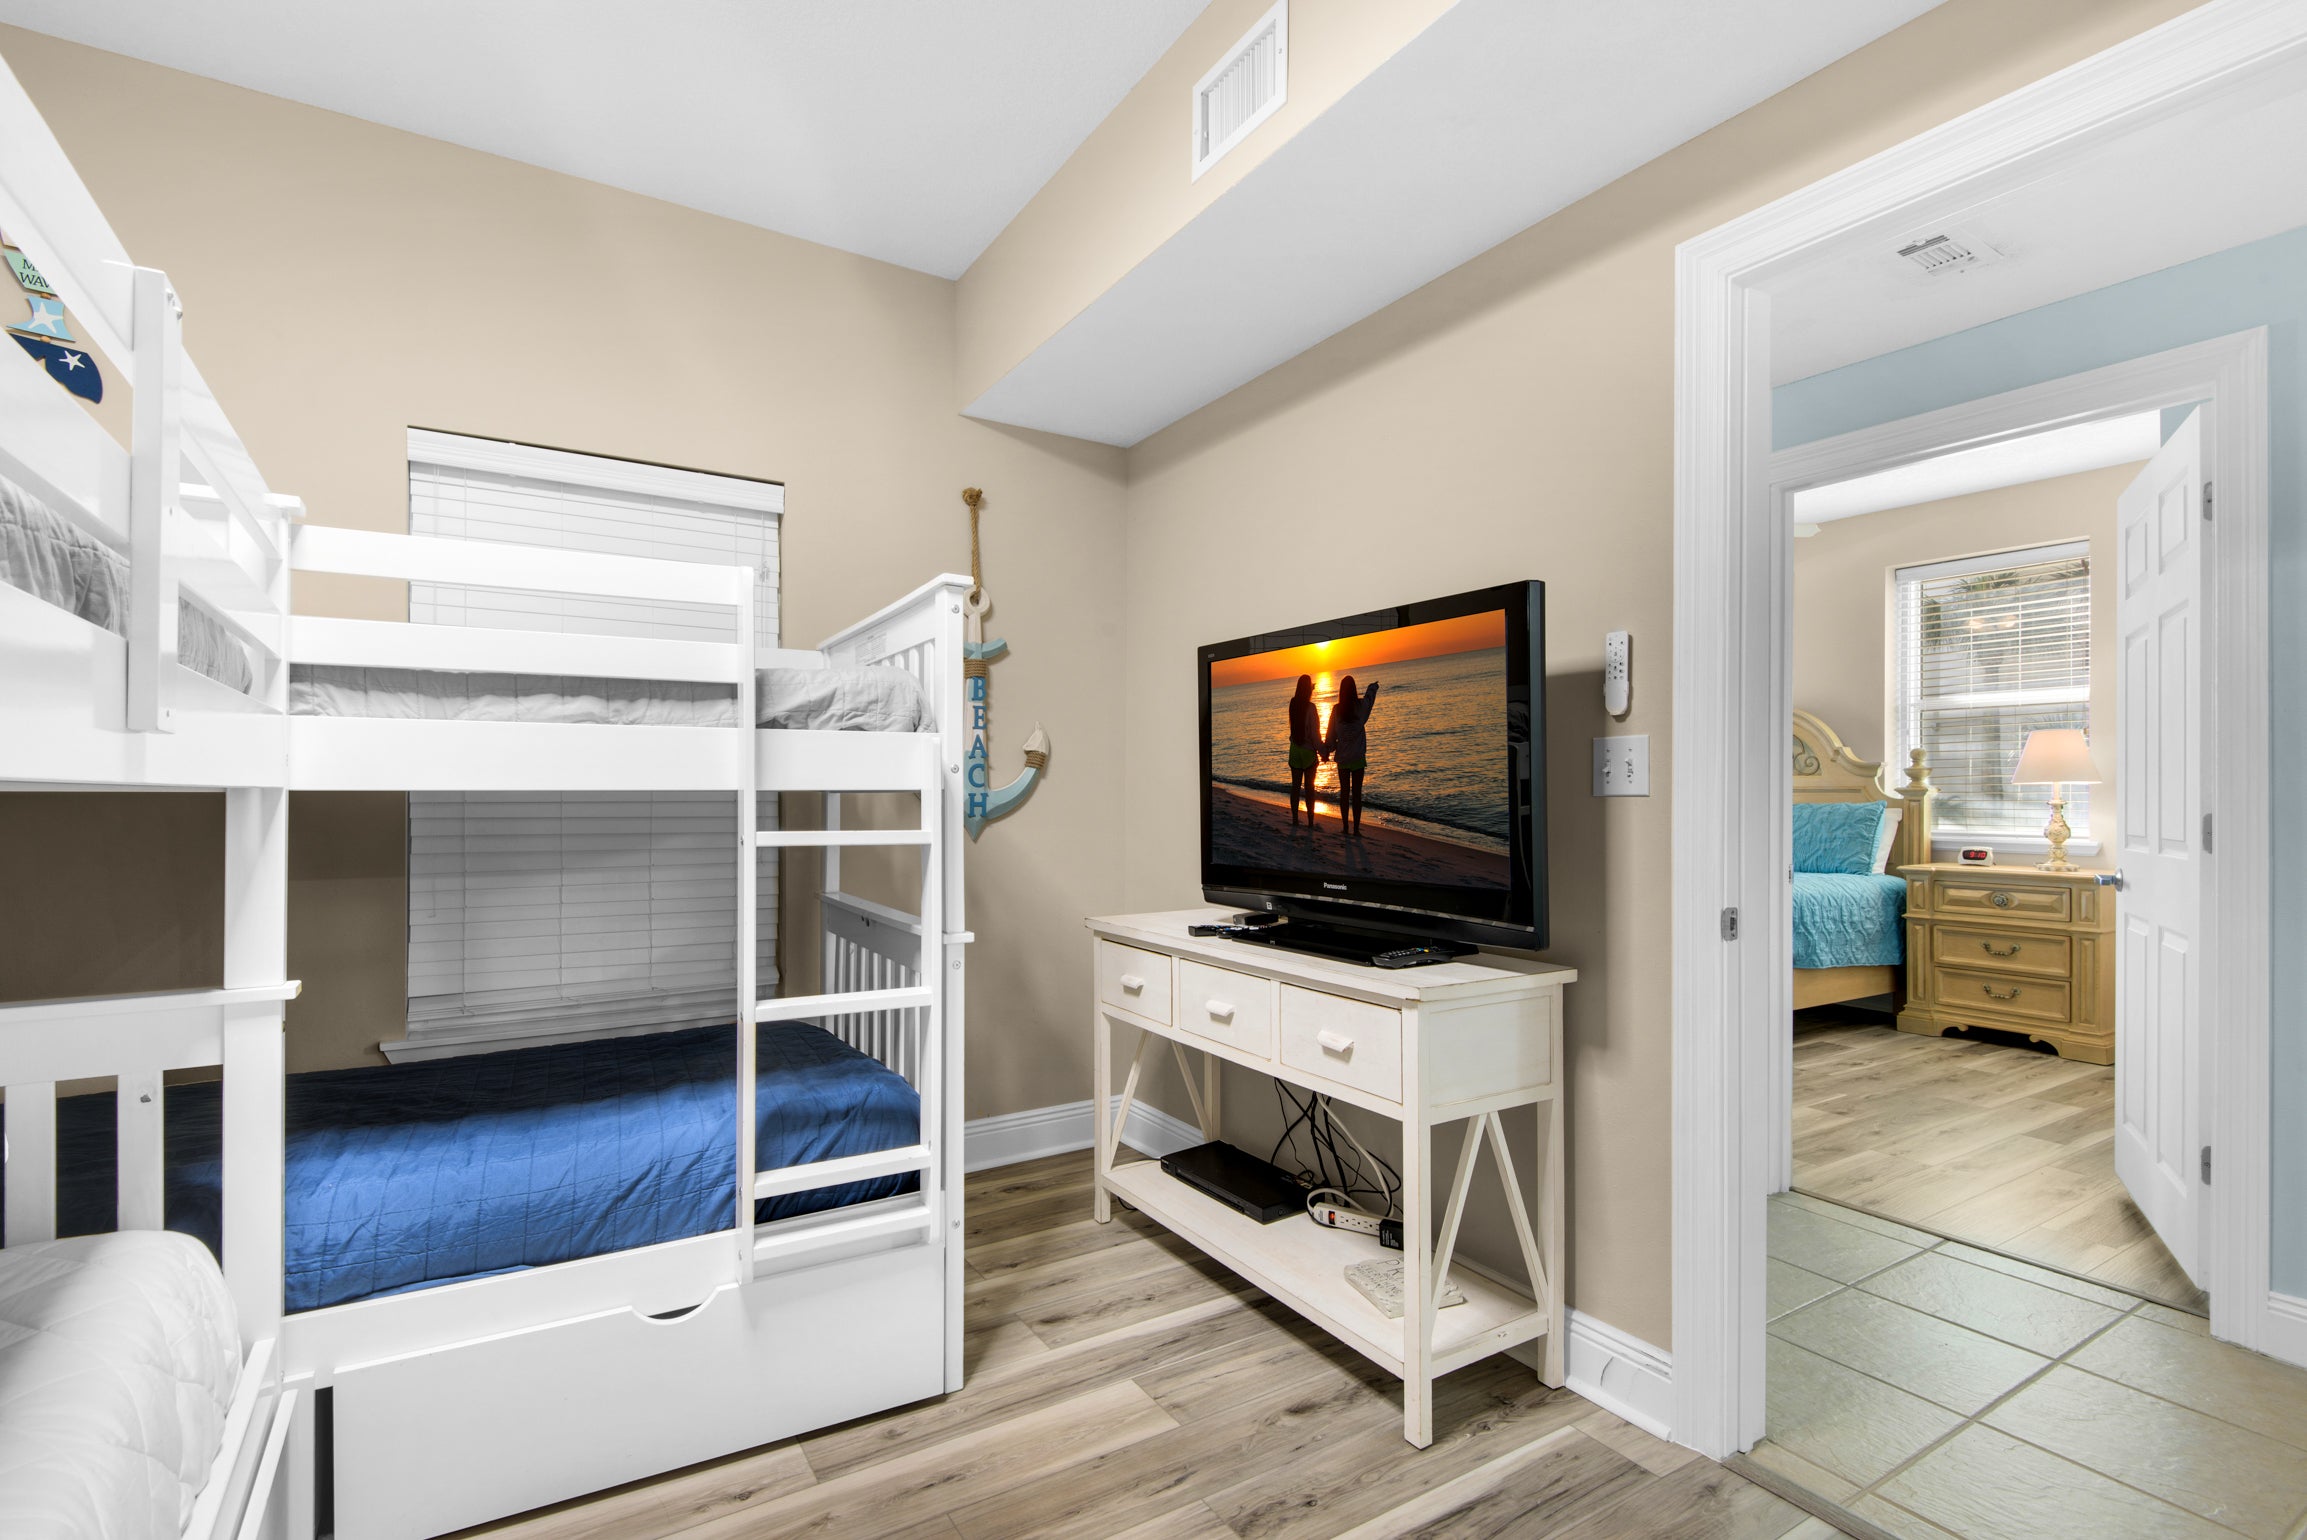 Bunk room with flat screen